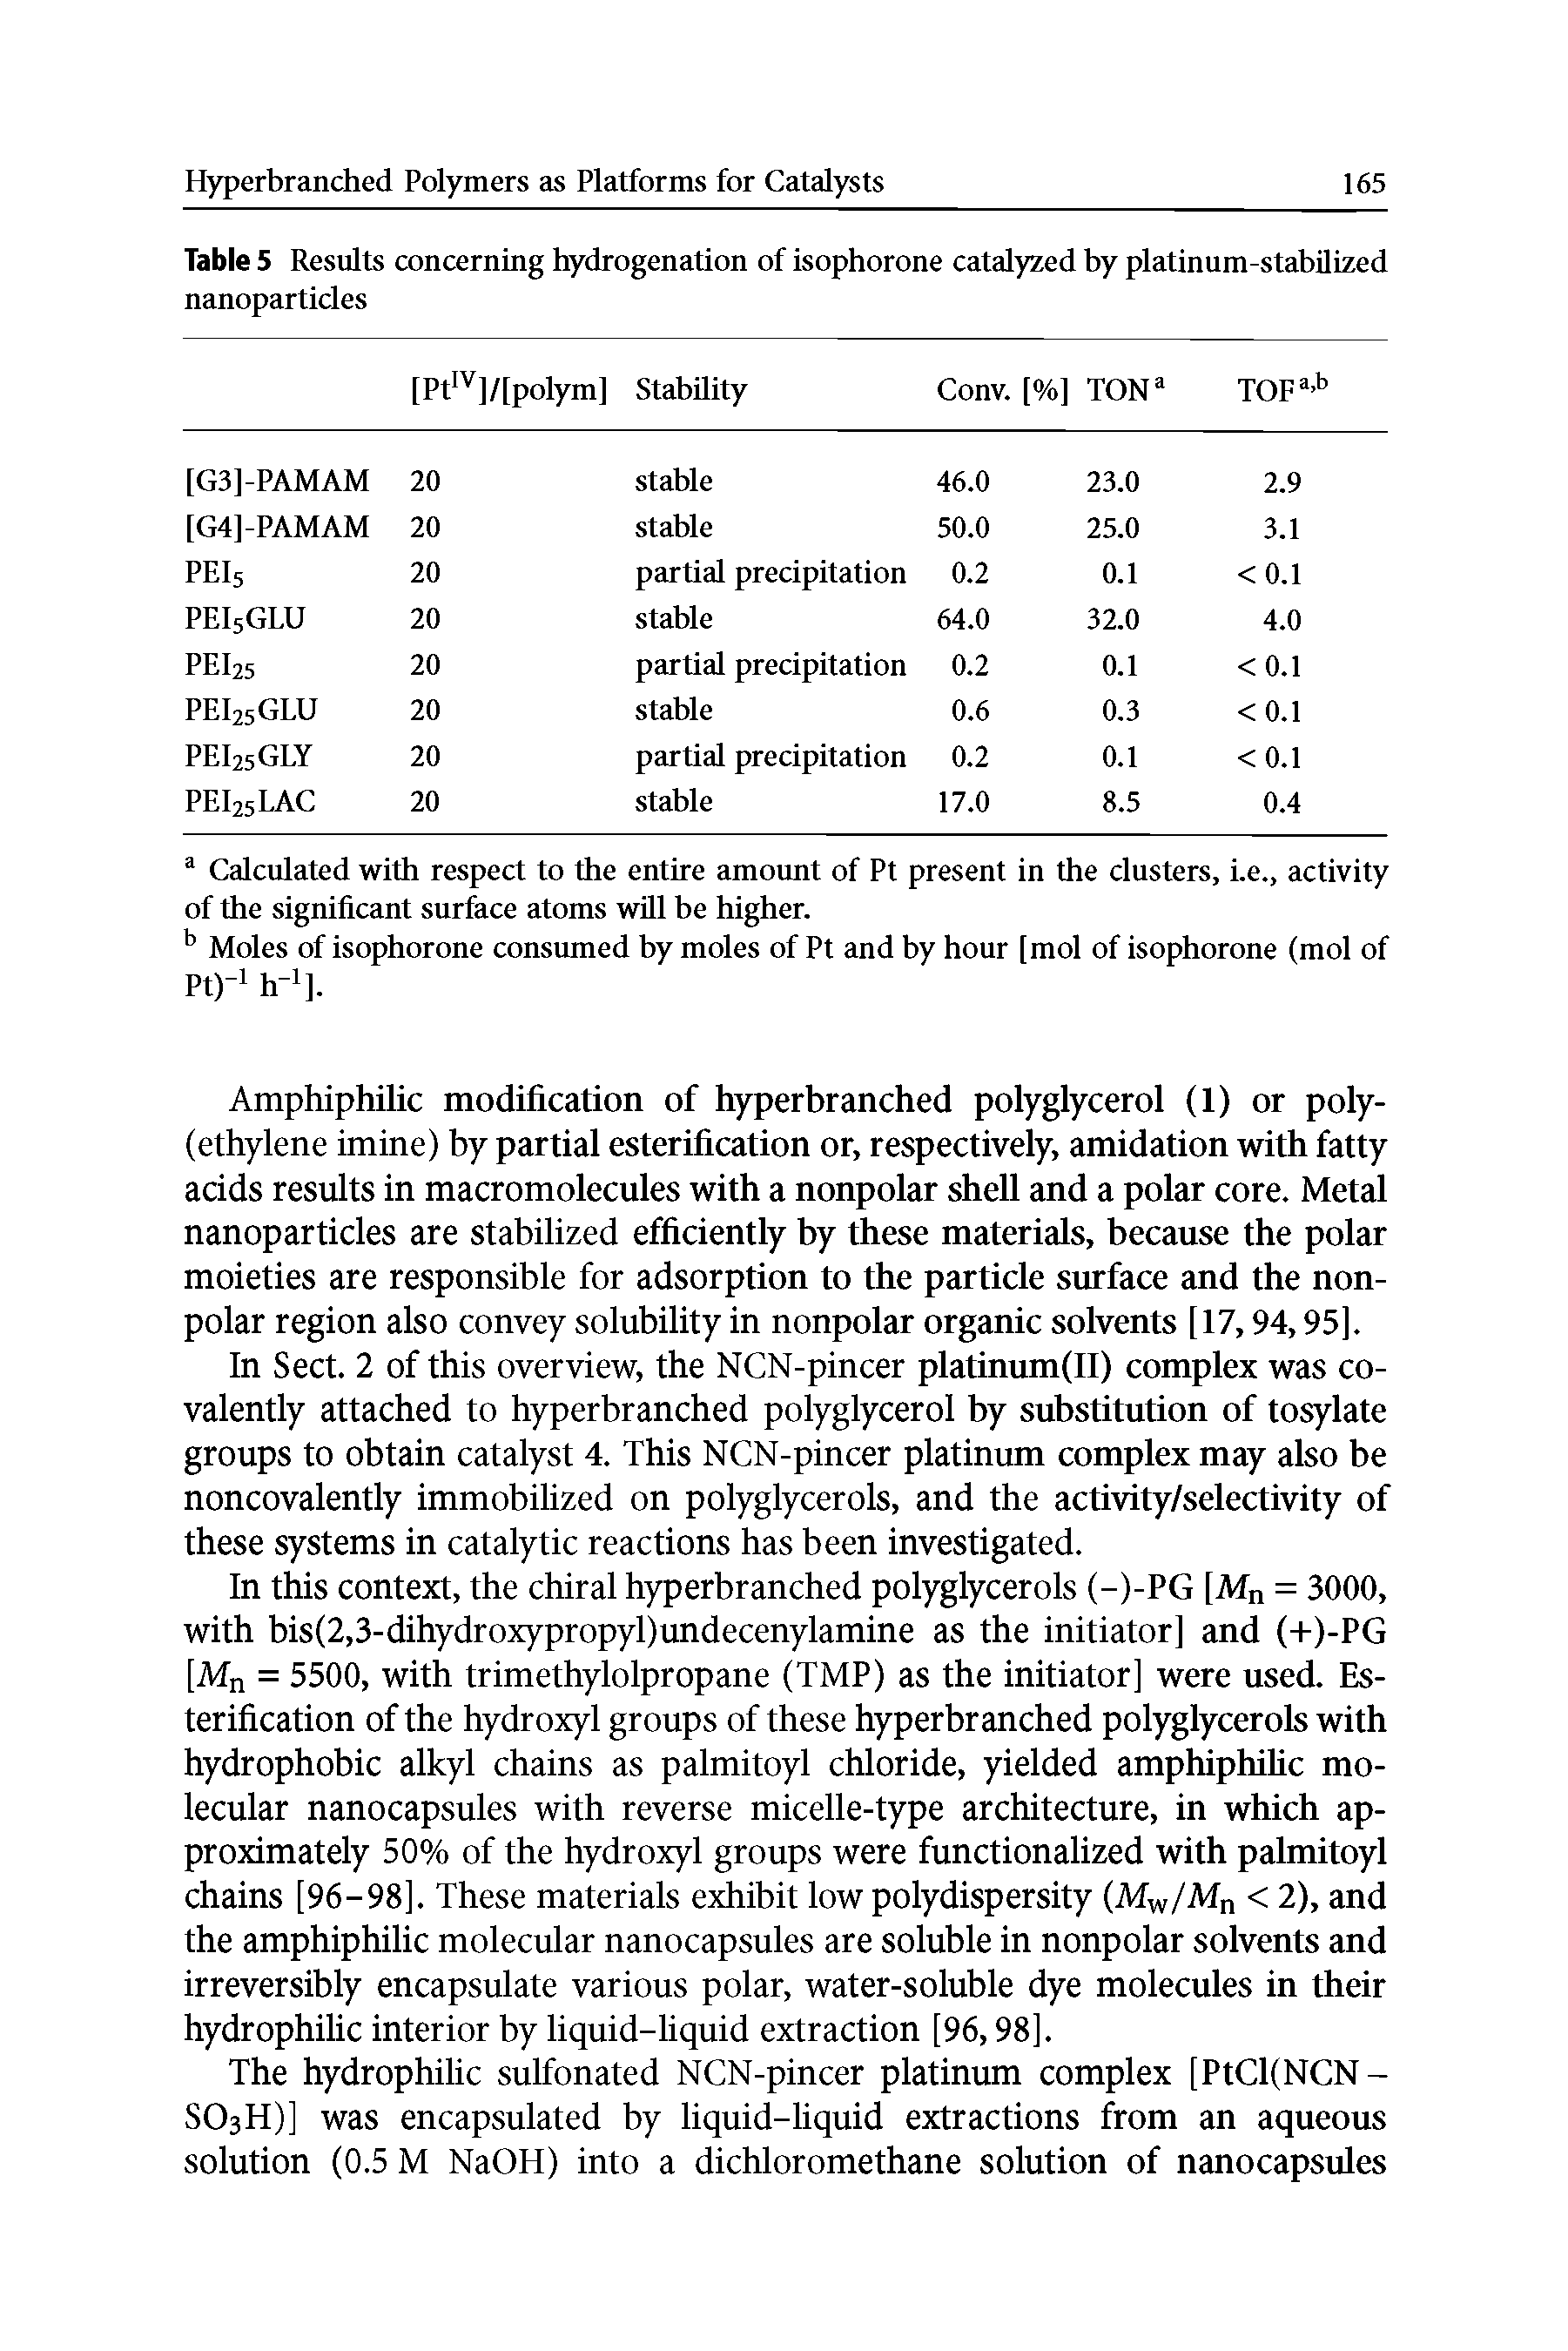 Table 5 Results concerning hydrogenation of isophorone catalyzed by platinum-stabilized nanoparticles...